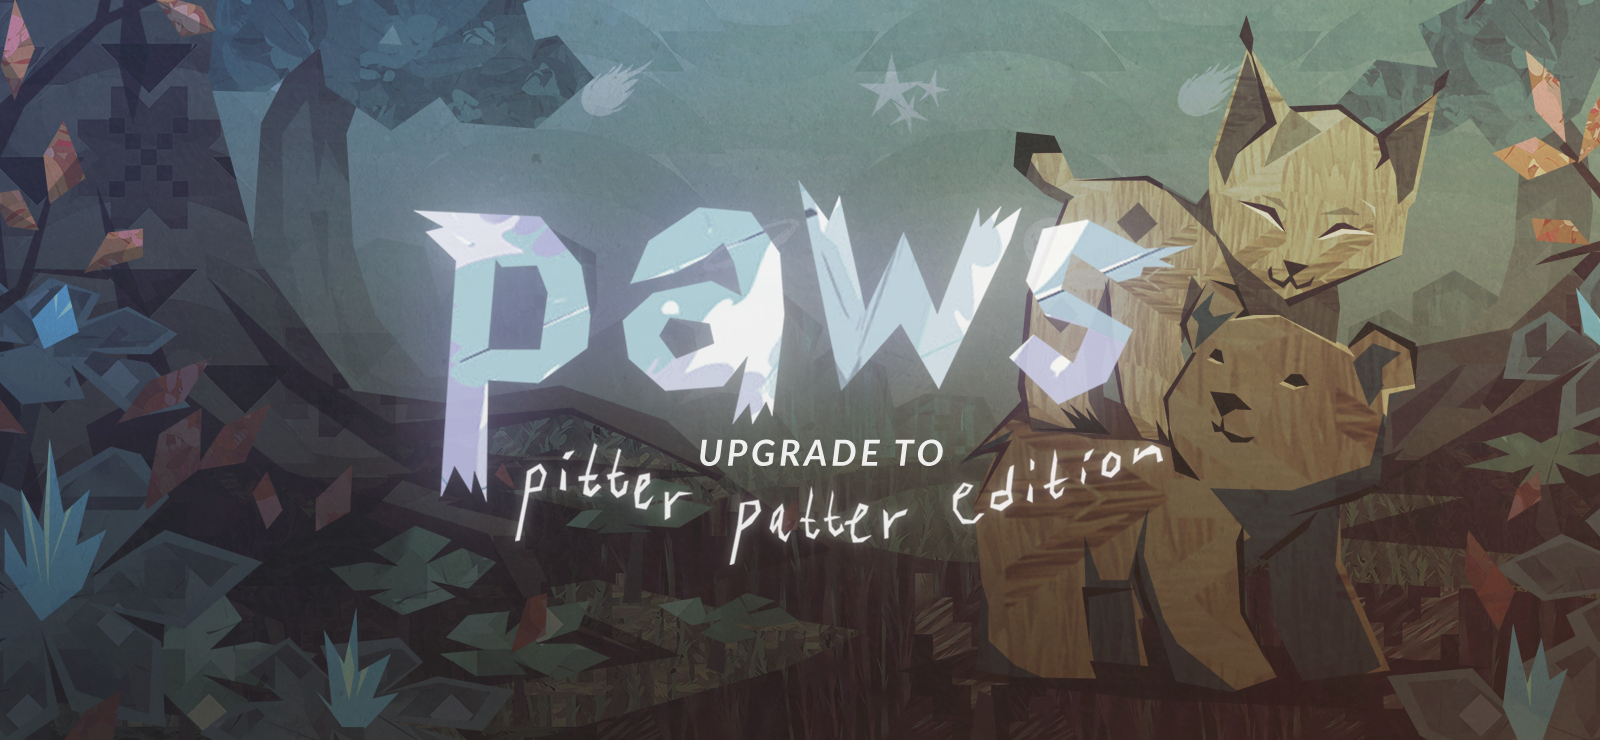 Paws: Upgrade To Pitter Patter Edition